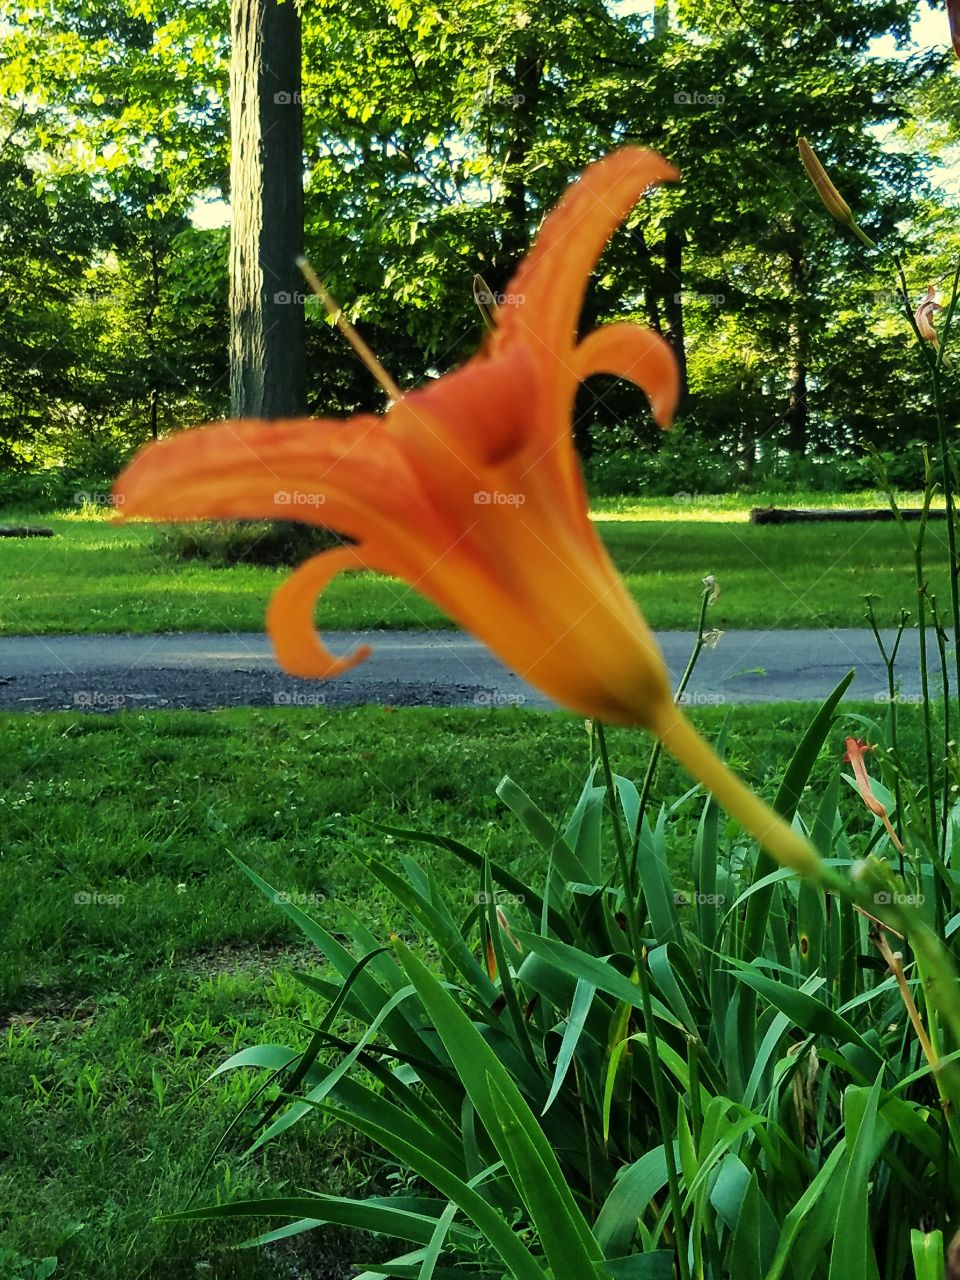 Side view of a day lily